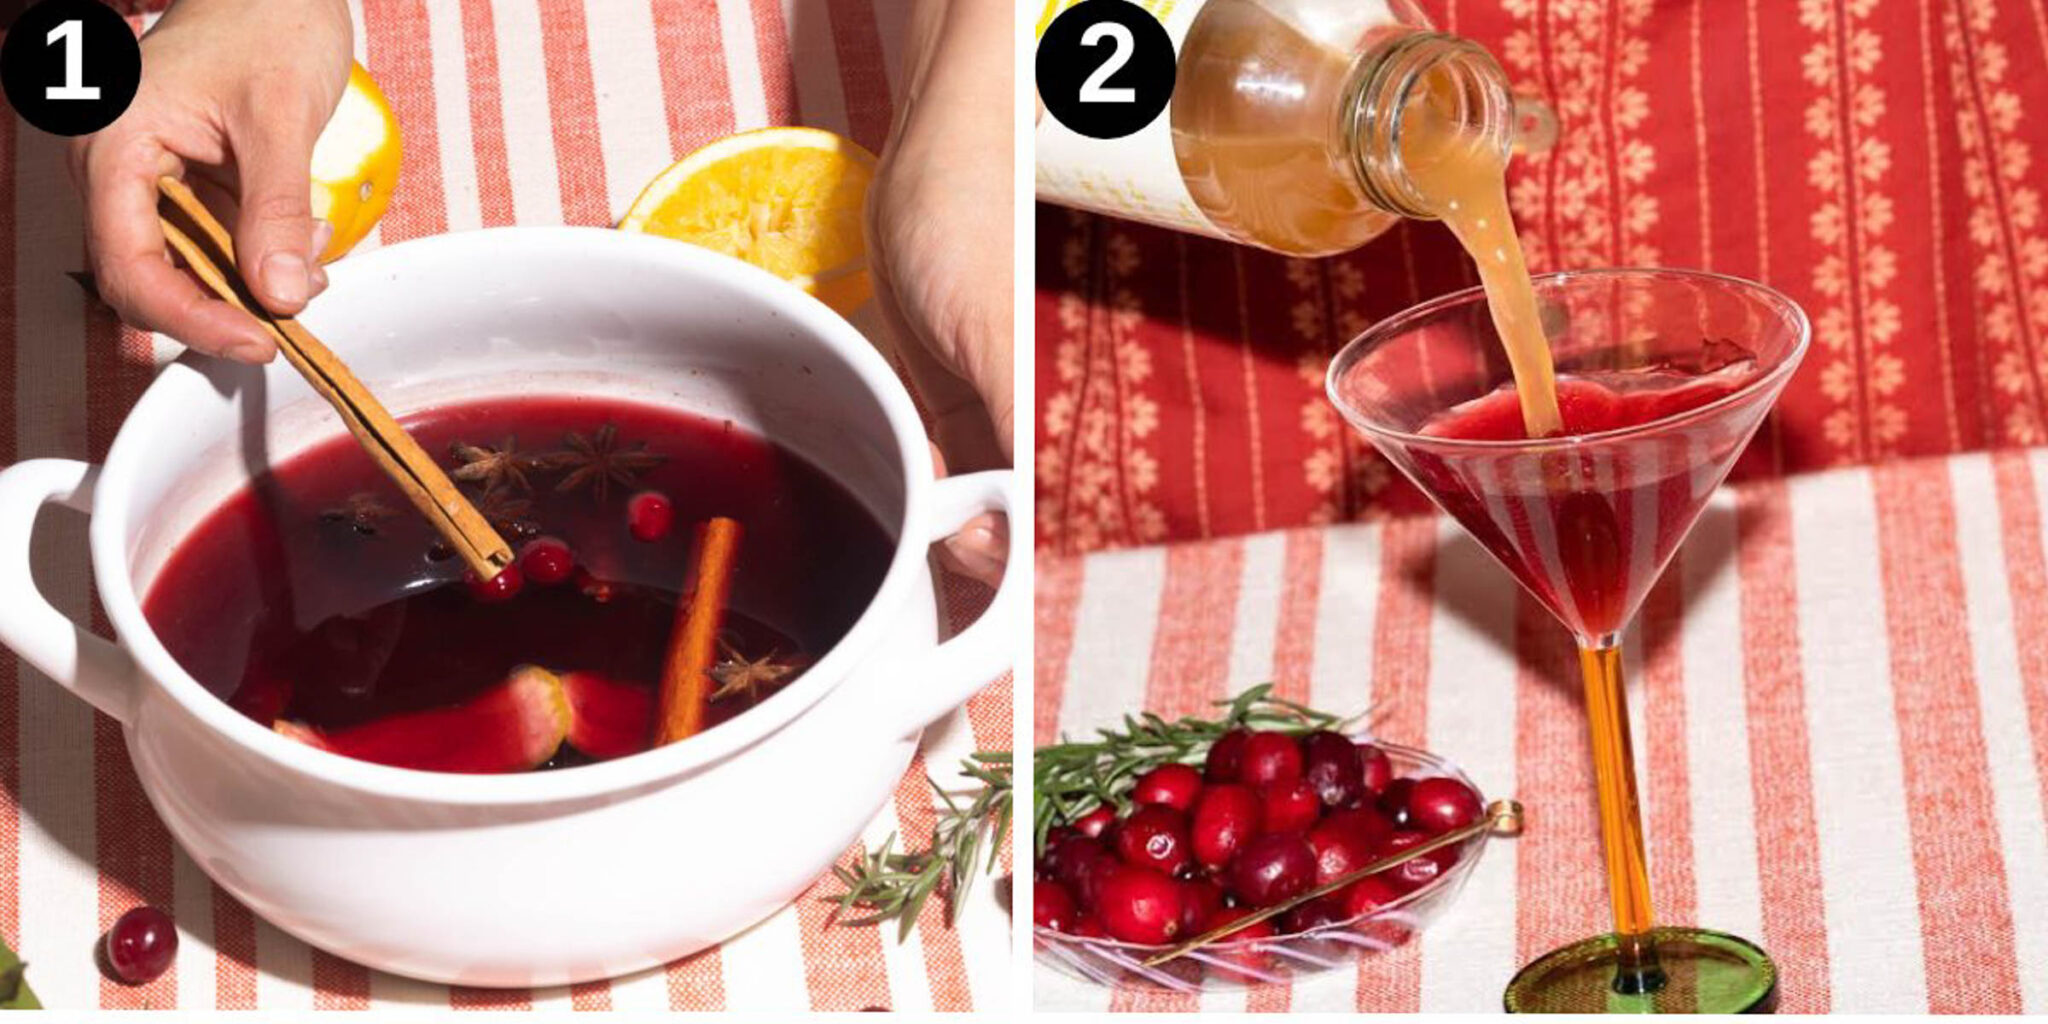 Cranberry drink steps 1 and 2, spices being added to a pot and juice poured into a glass.